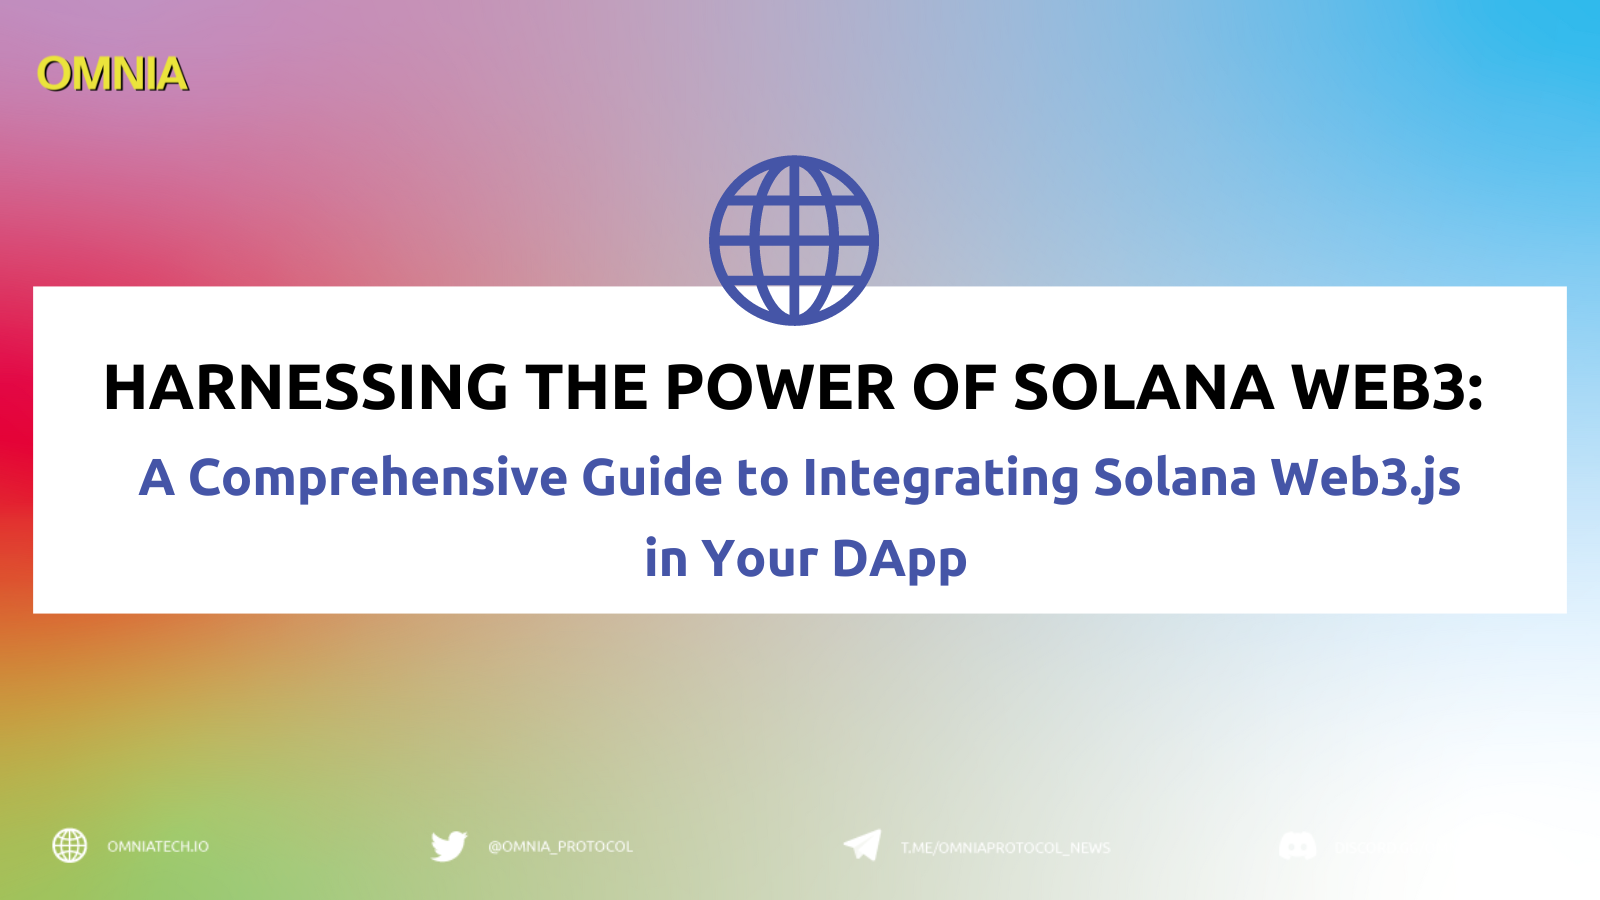 Harnessing the Power of Solana Web3: A Comprehensive Guide to Integrating Solana Web3.js in Your DApp